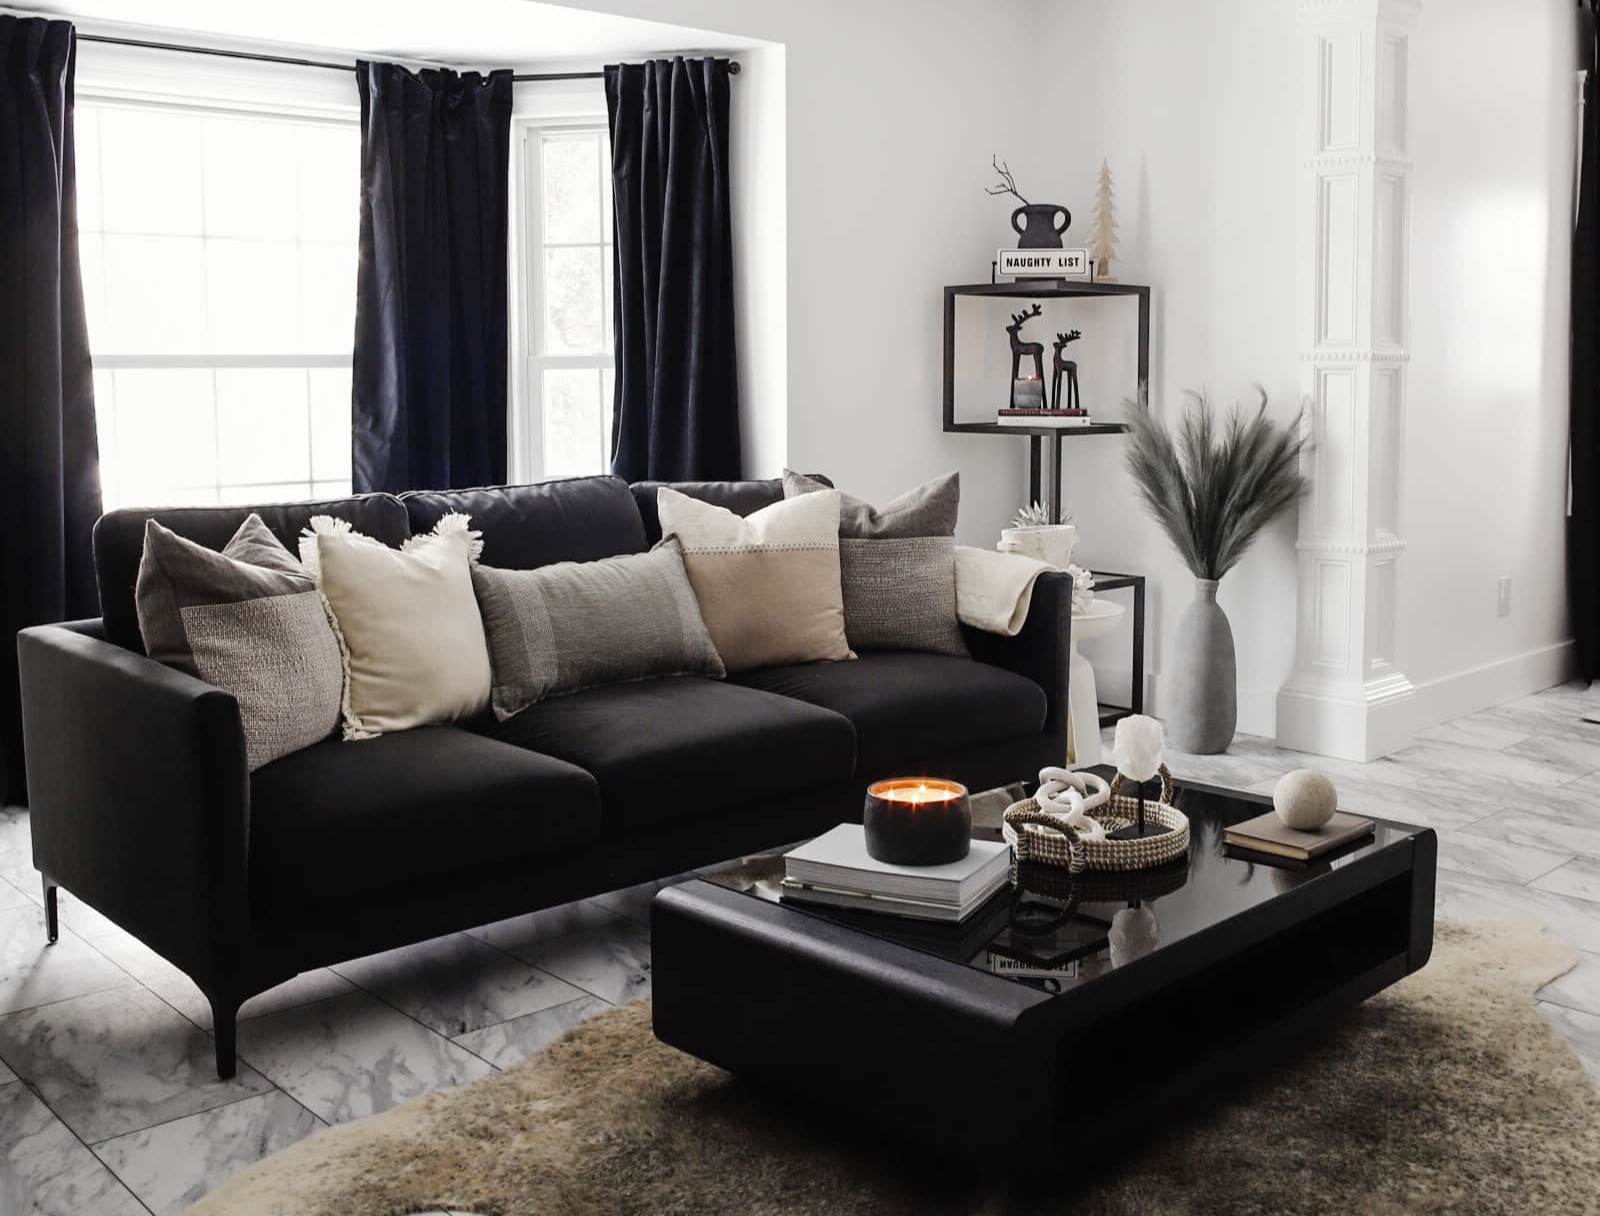 What Color Curtains Go With Black Furniture